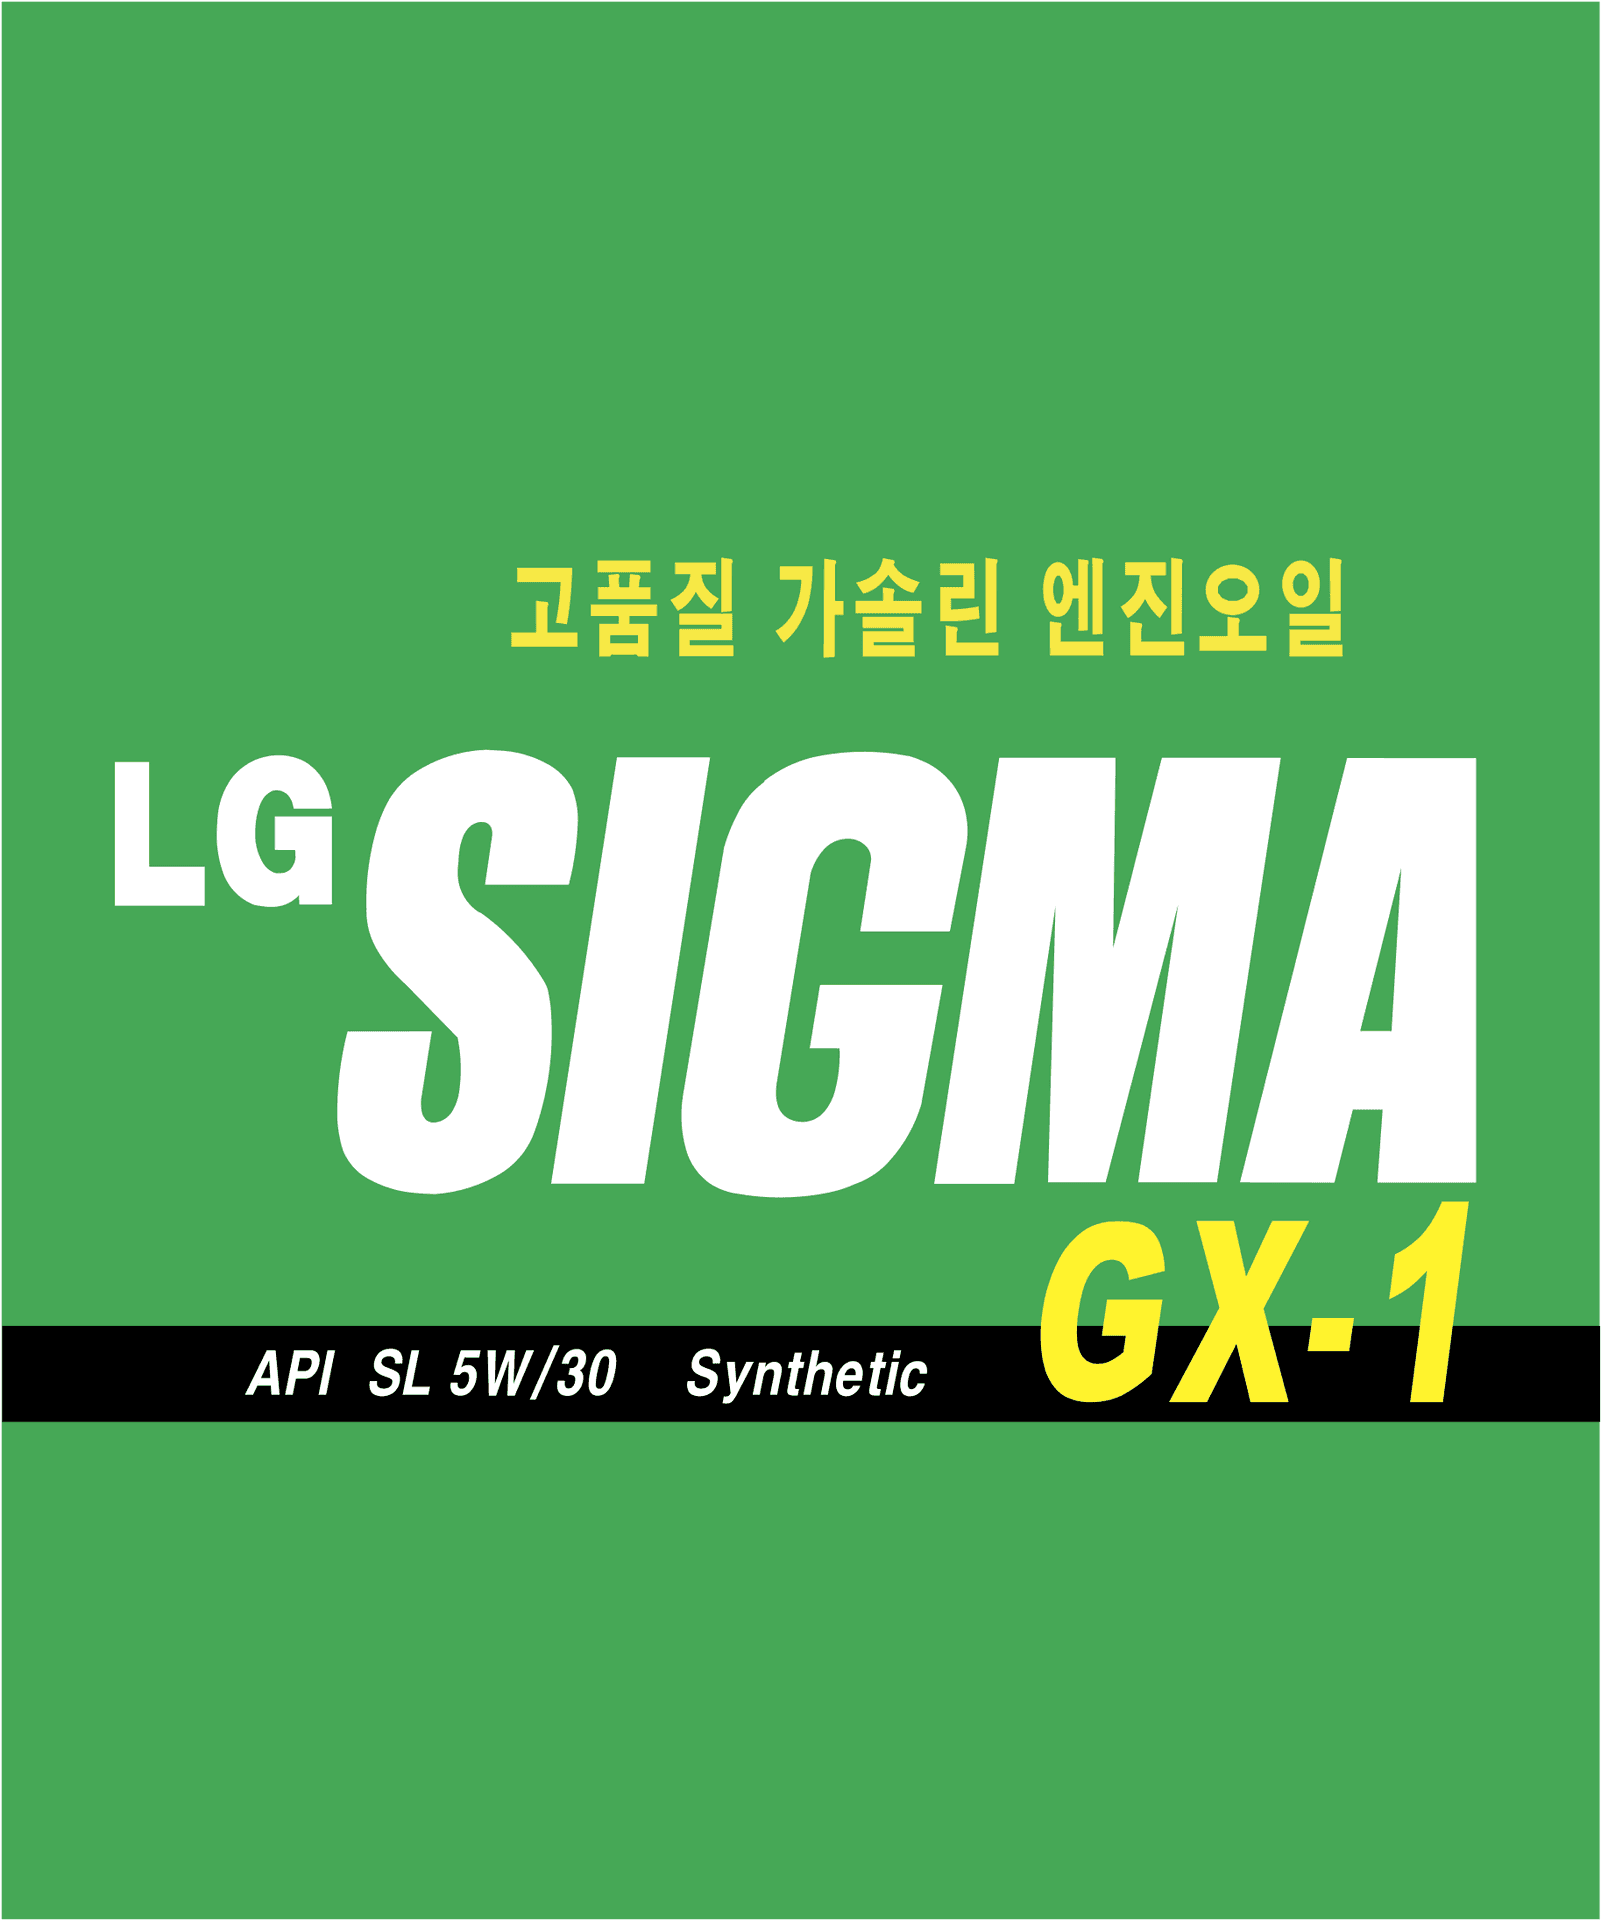 L G Sigma G X1 Motor Oil Advertisement PNG